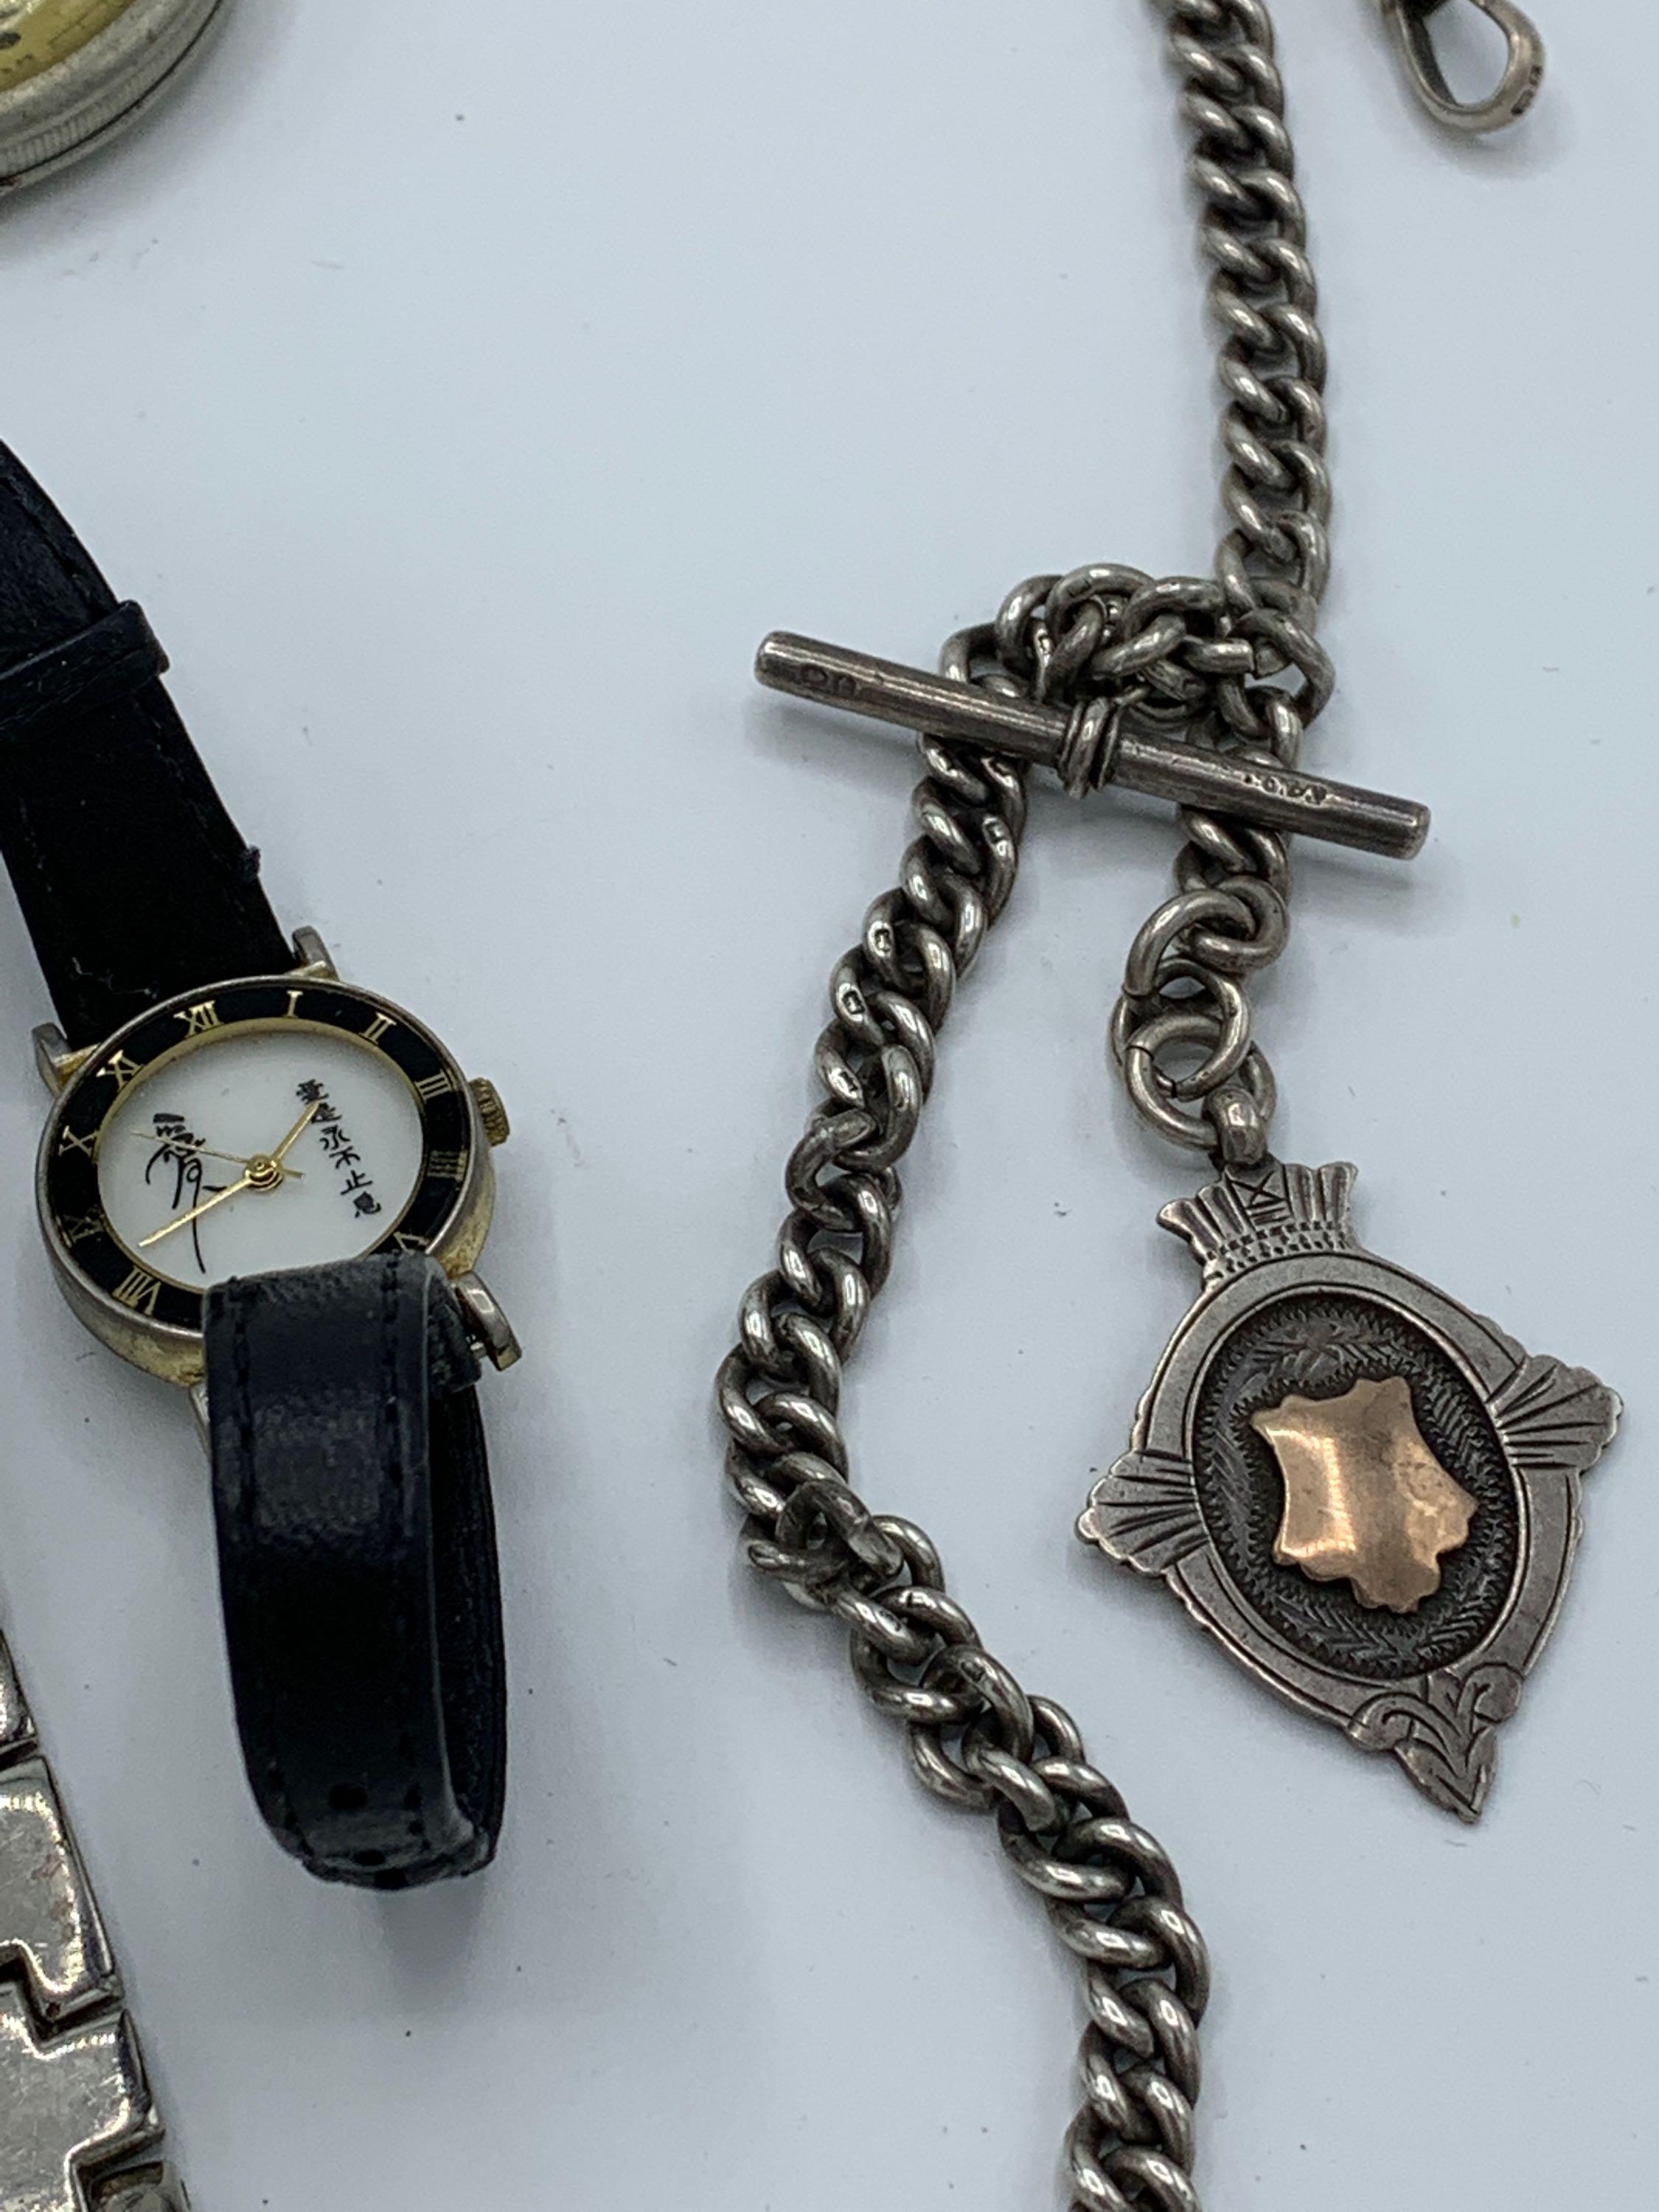 Ingersoll Ltd 'Triumph' pocket watch, Alpina pocket watch, and silver fob chain - Image 4 of 4